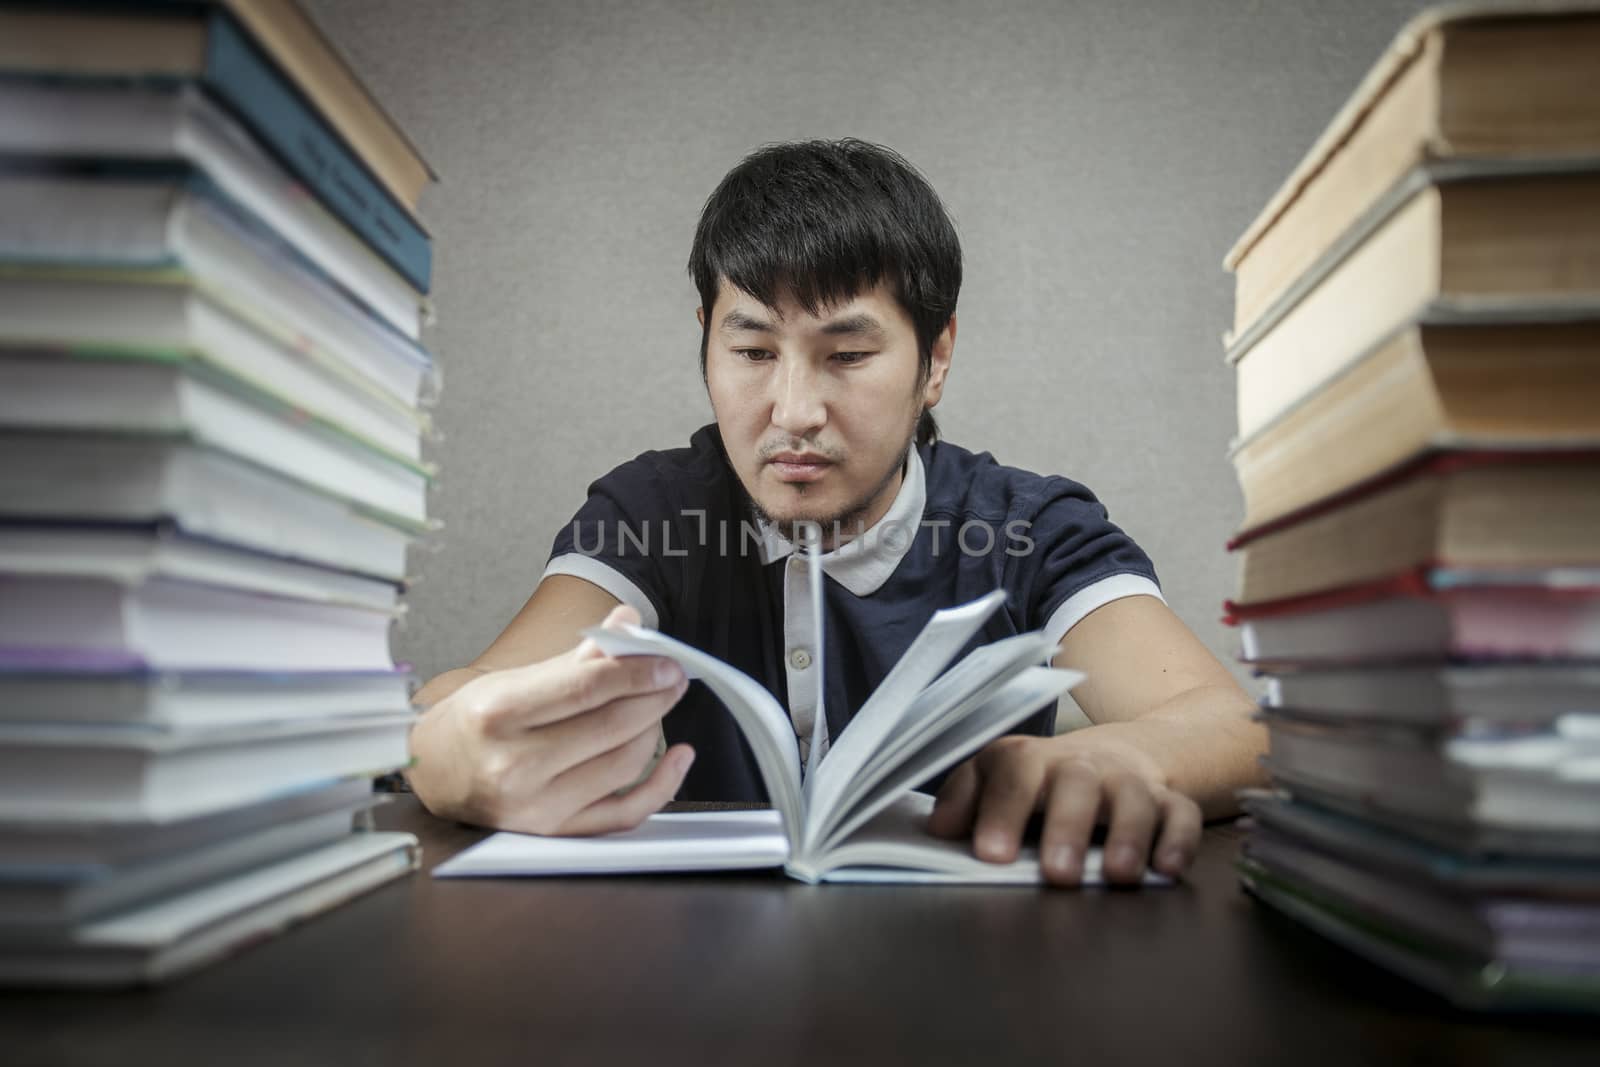 The young man looks at book on a table between textbooks